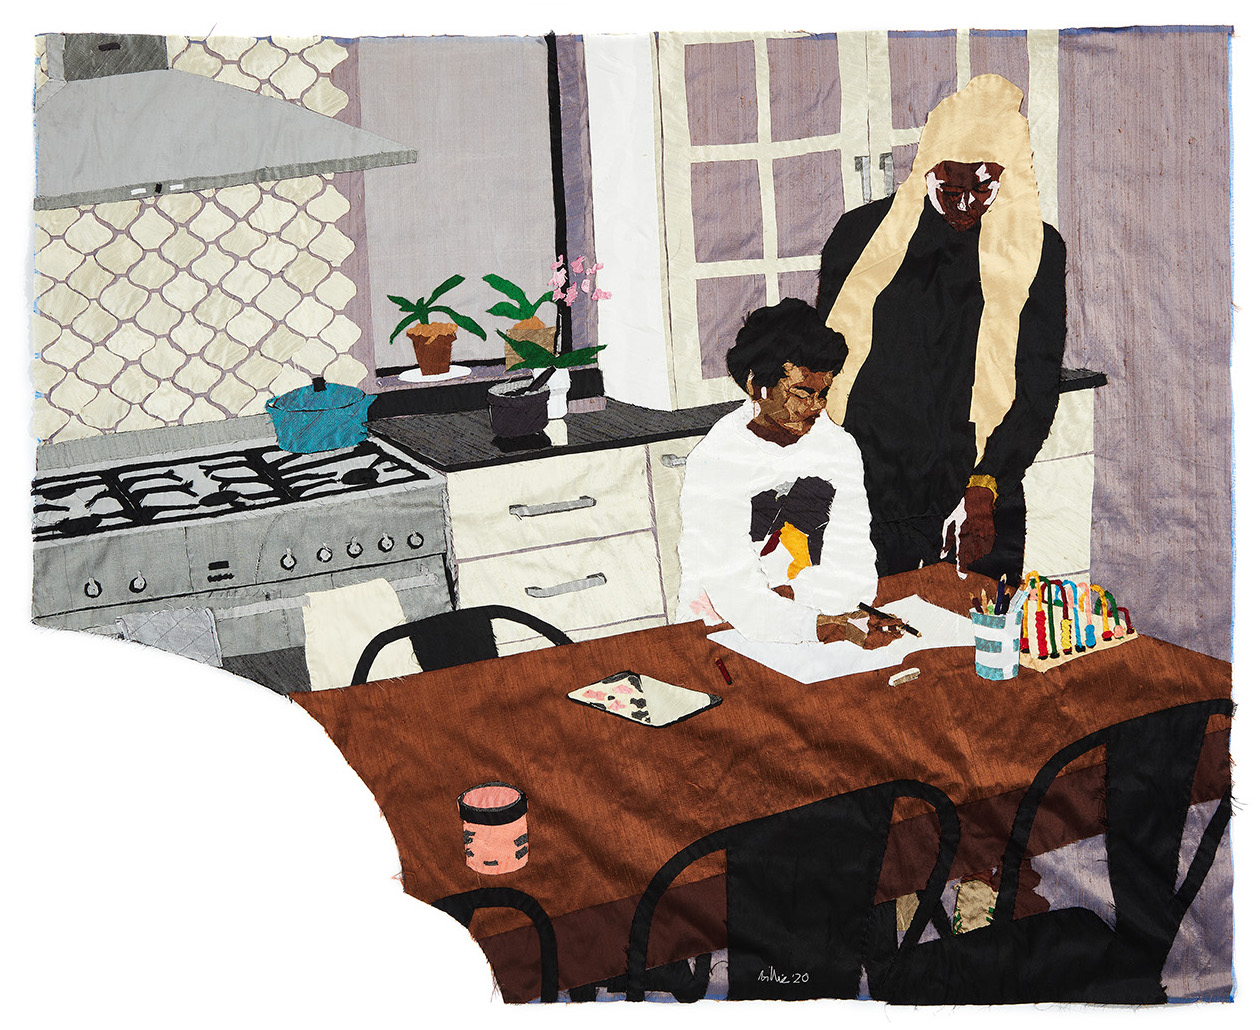 In a grey modern kitchen, a dark skinned mother stands beside her son, who is seated with a pen and paper in his hands. Behind them, an orchid sits on the counter and a small blue pot sits on the stove.